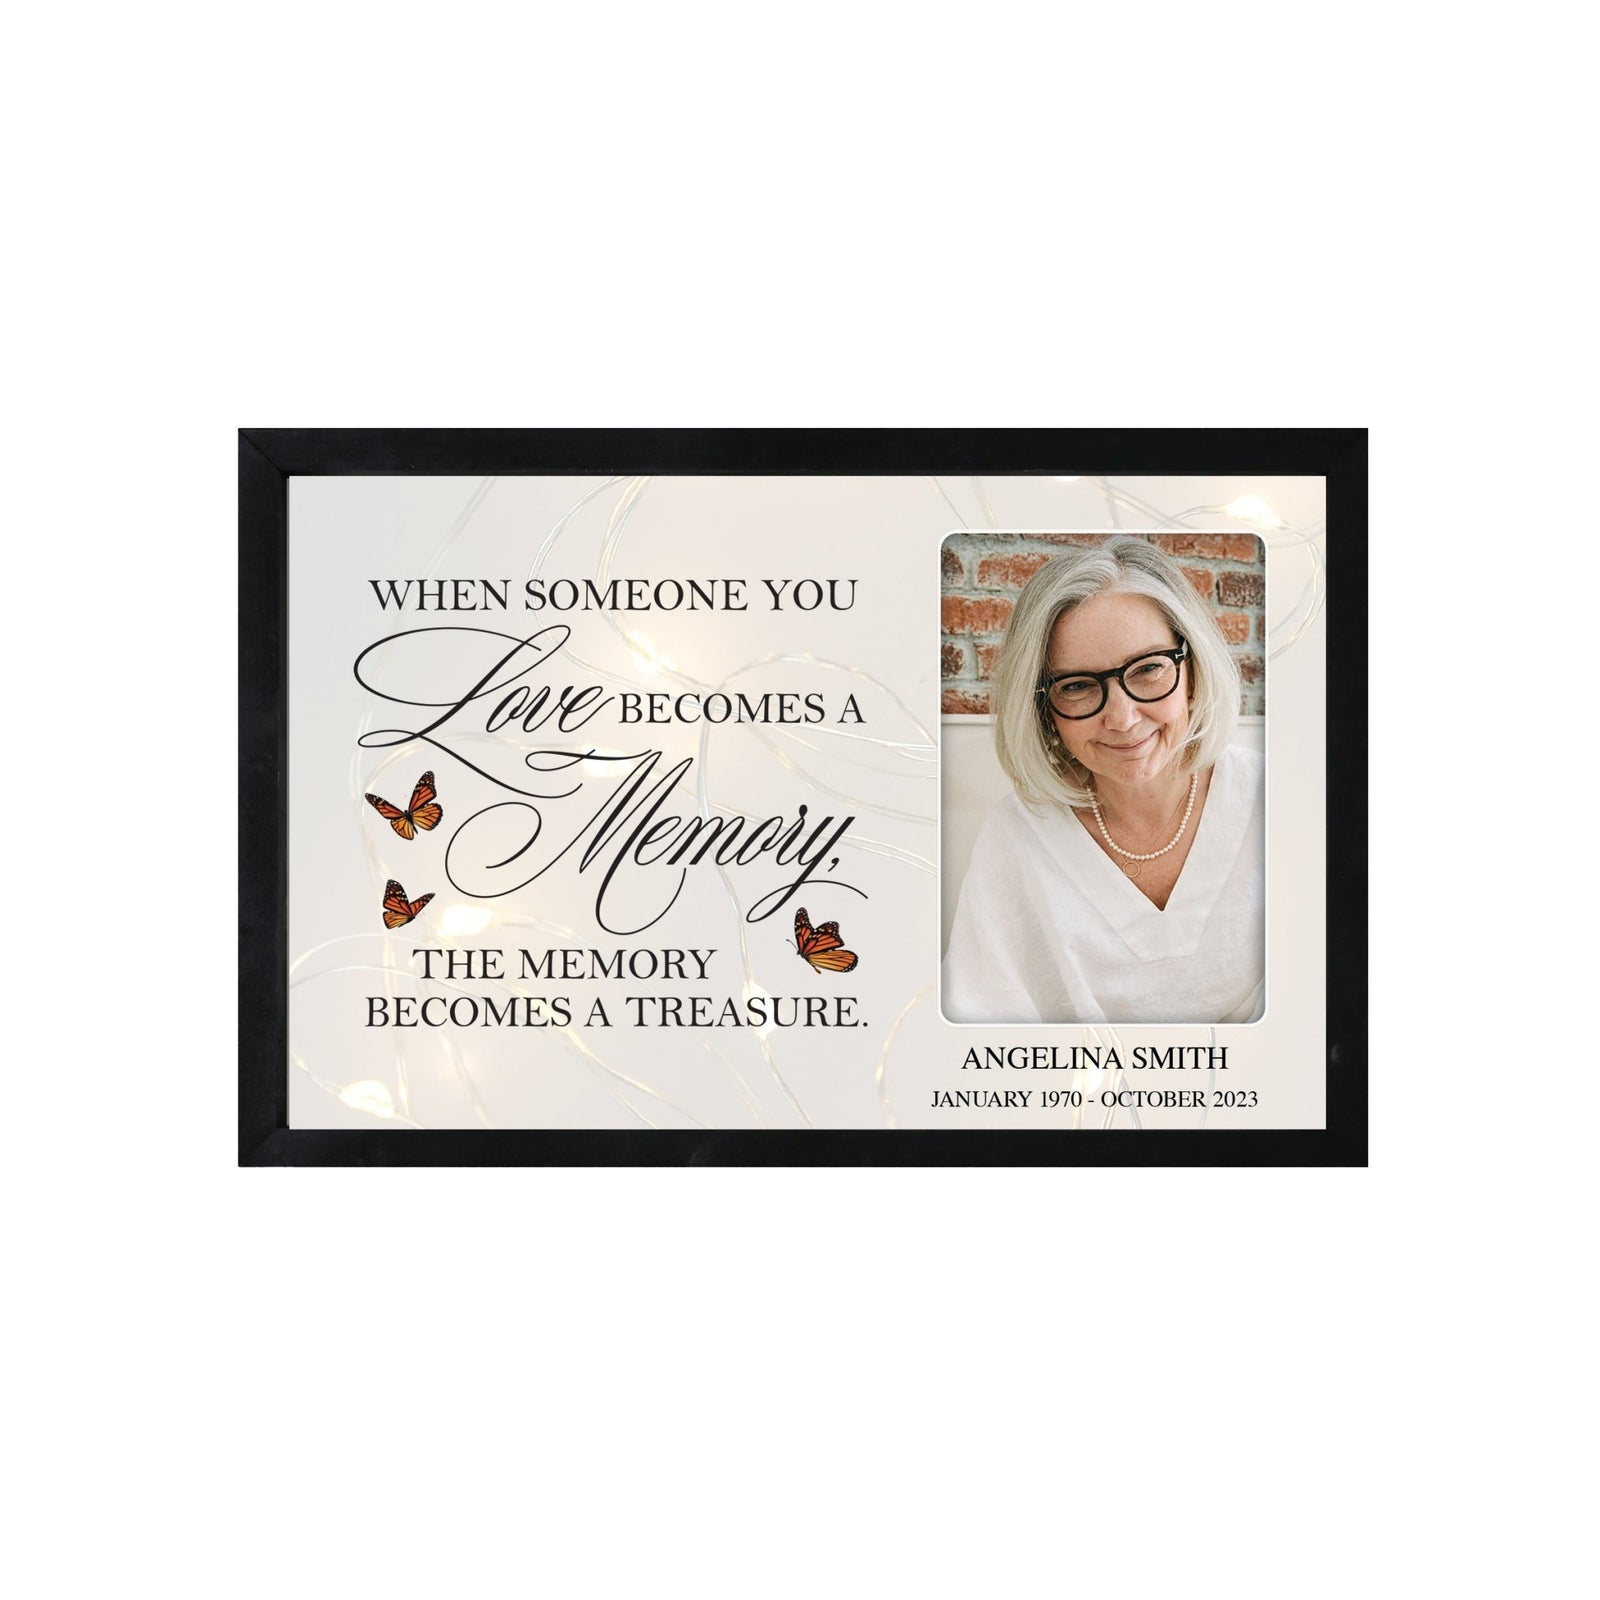 Personalized Memorial Black Framed Shadow Box With Lights Sympathy Gift Wall Décor - When Someone You Love - LifeSong Milestones